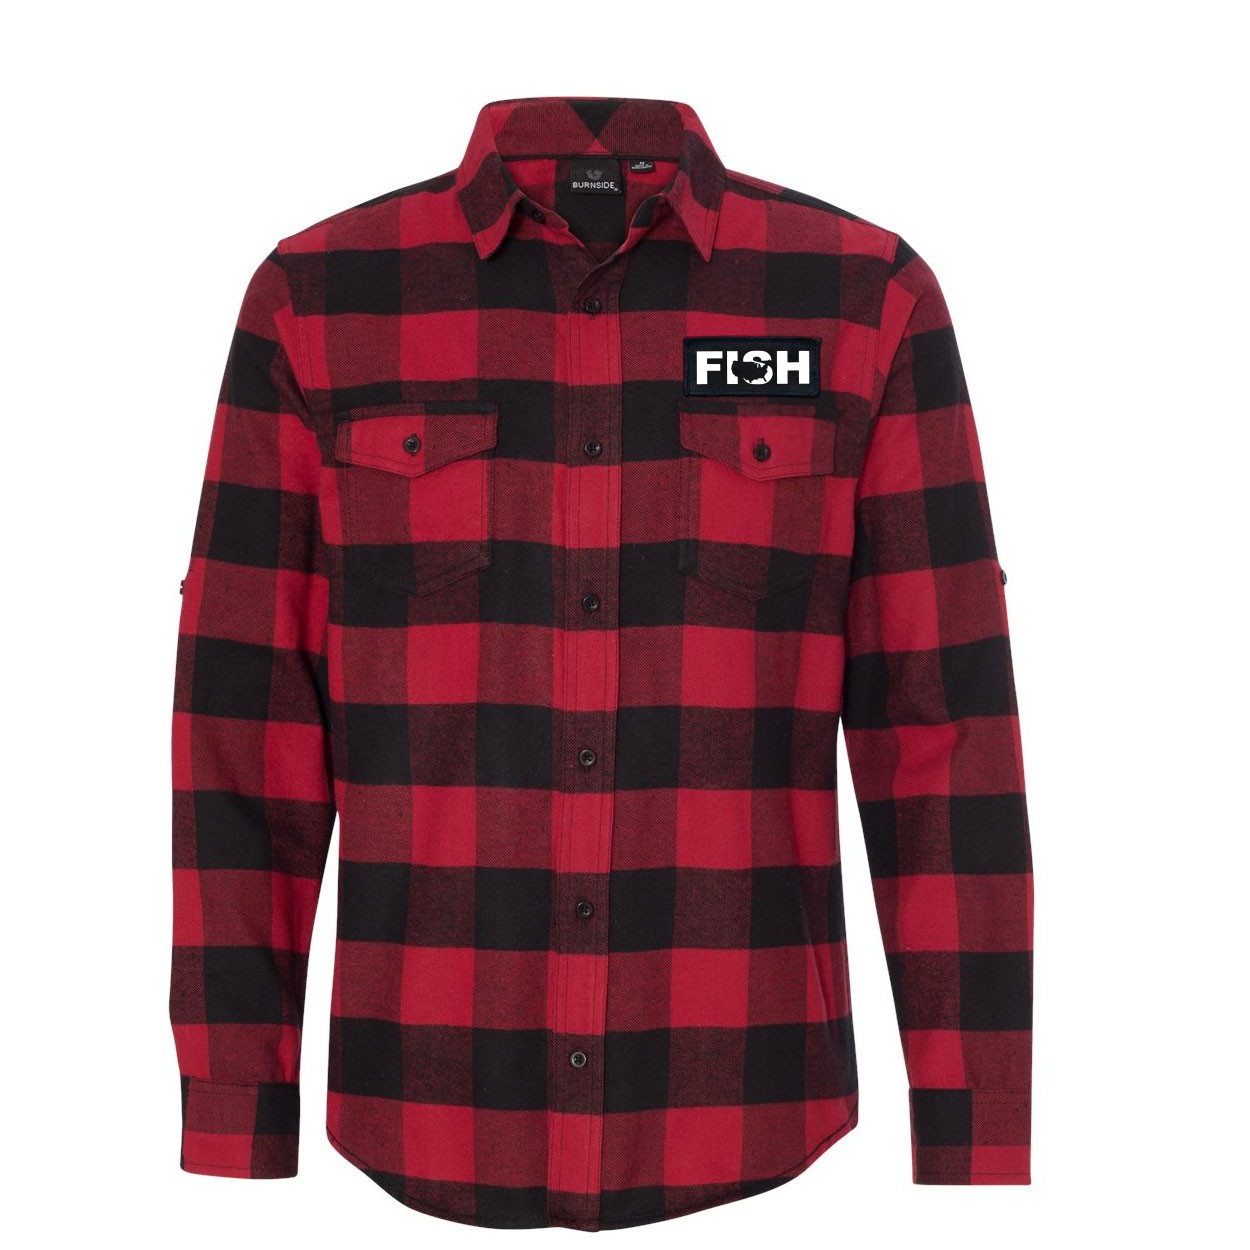 Fish United States Classic Unisex Long Sleeve Woven Patch Flannel Shirt Red/Black Buffalo (White Logo)